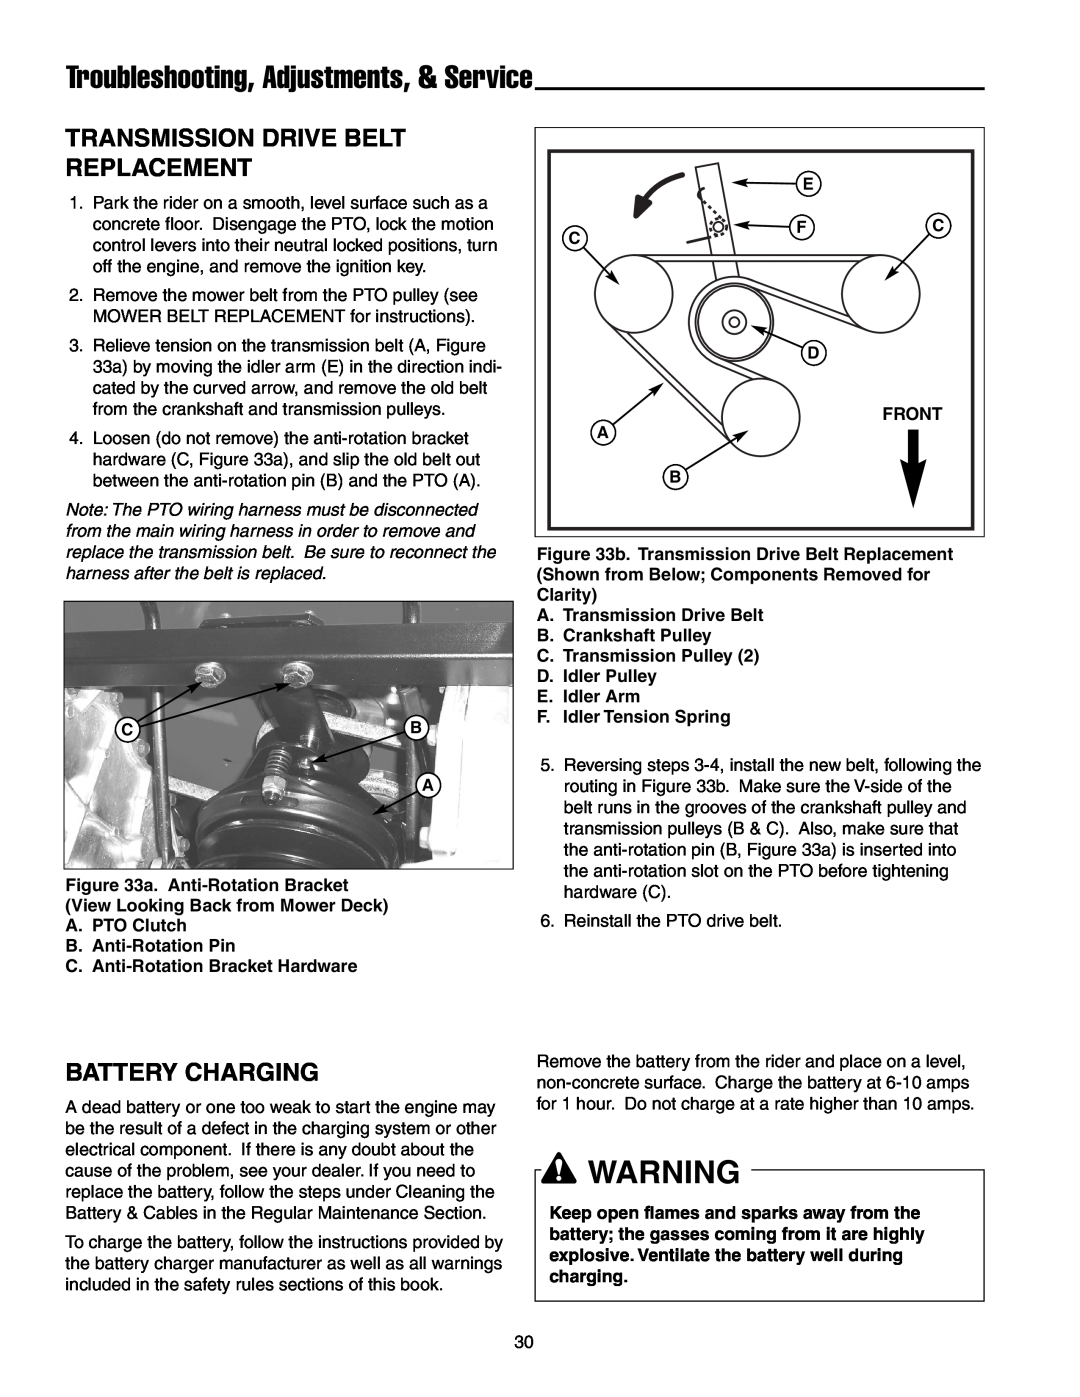 Simplicity 7800071 Transmission Drive Belt Replacement, Battery Charging, Troubleshooting, Adjustments, & Service, Cb A 